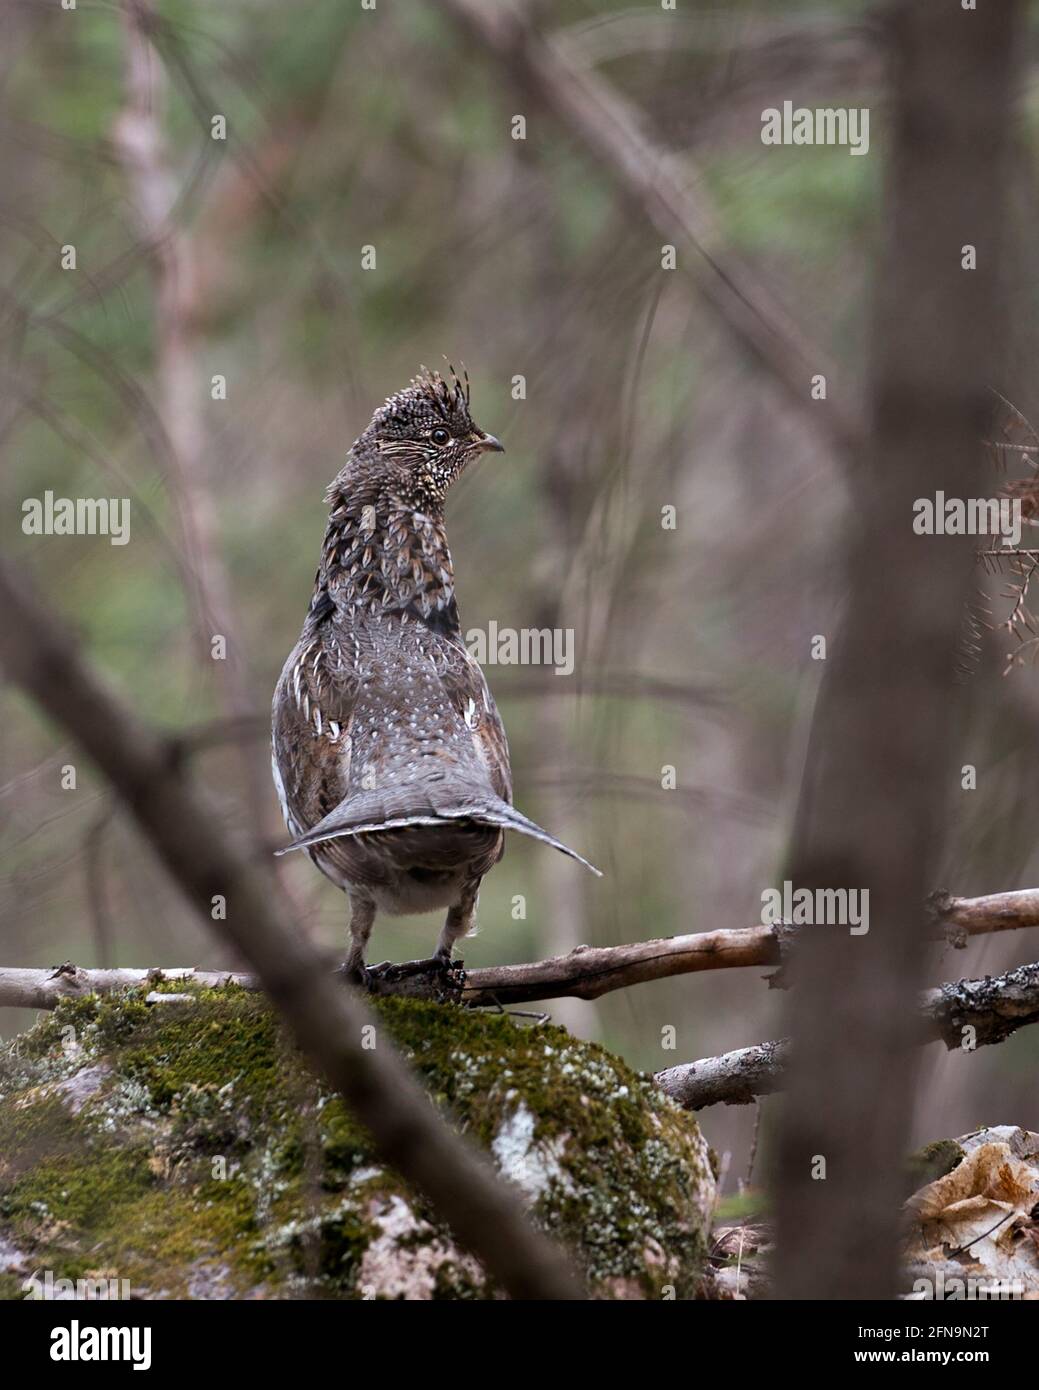 Partridge standing on moss rock in the forest in the spring season with a rear view displaying brown feathers, eye, beak, in its environment and habit Stock Photo